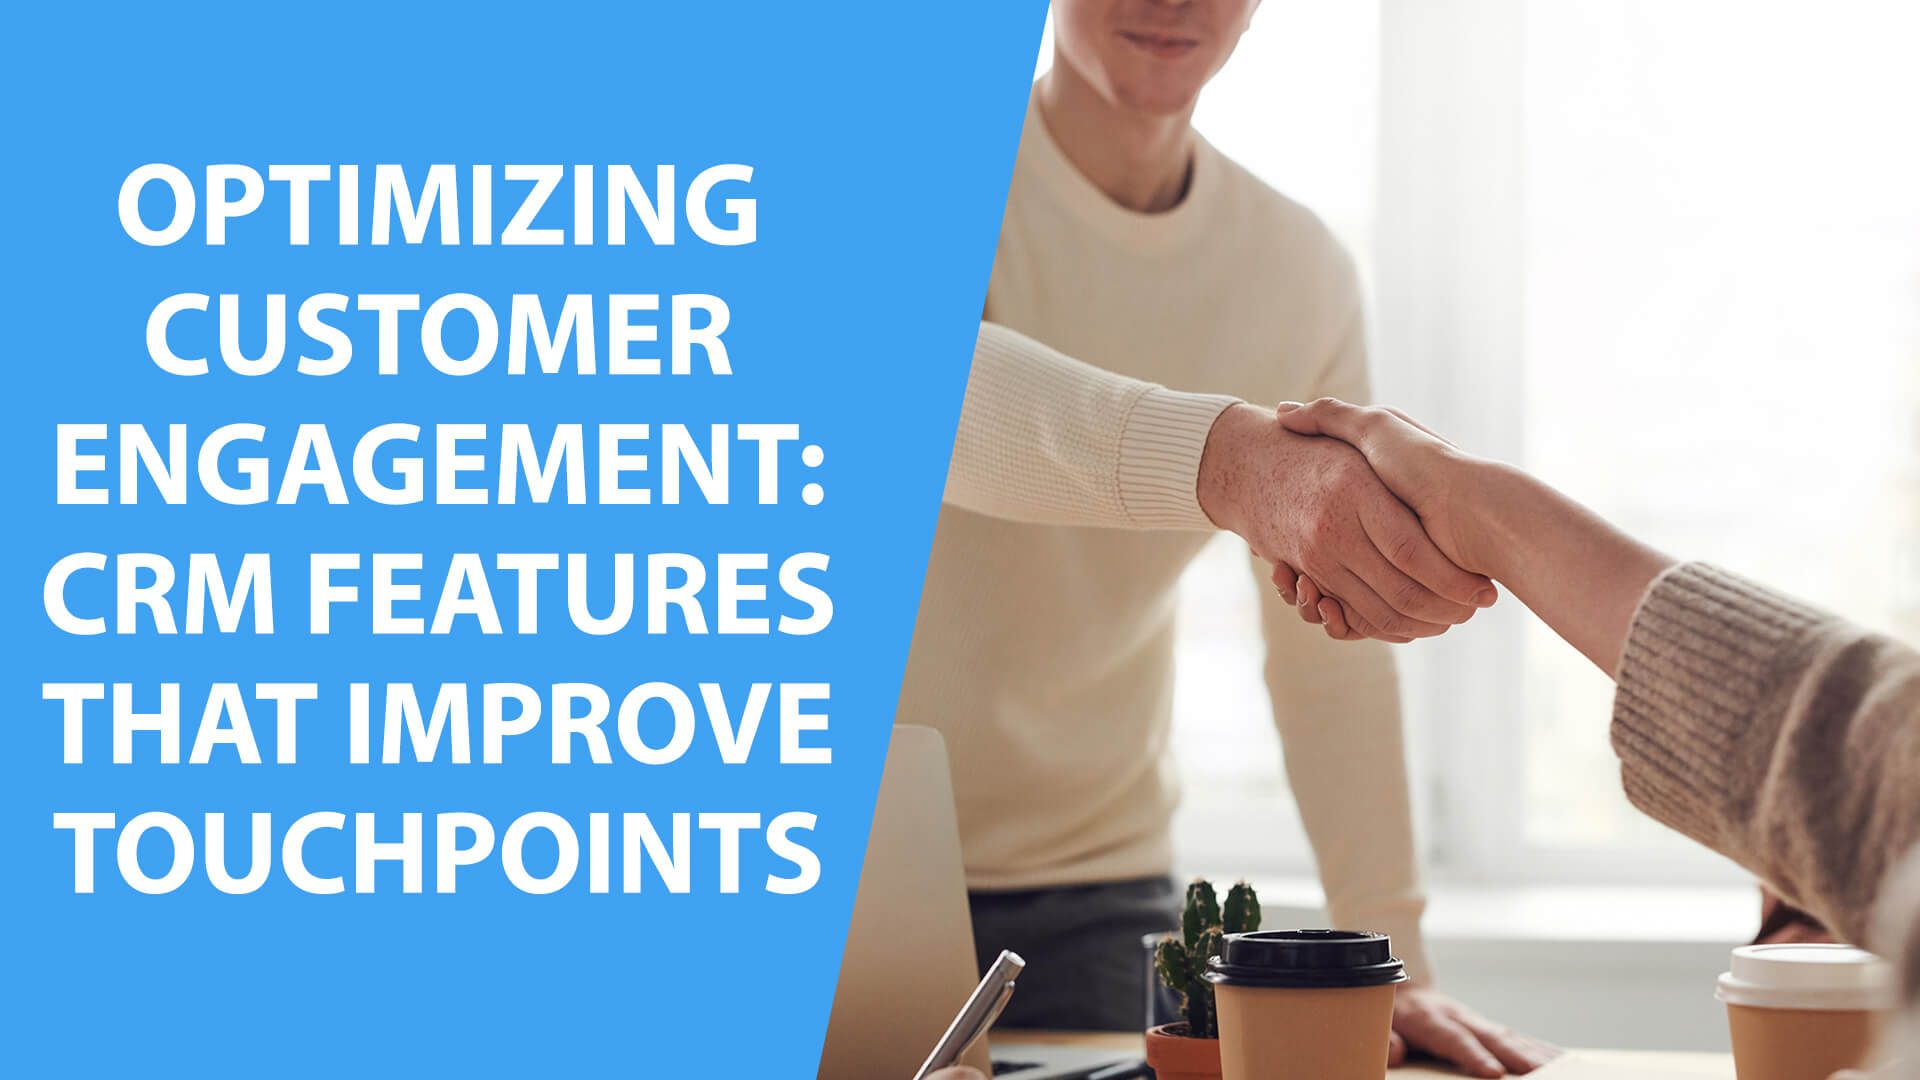 Optimizing Customer Engagement: CRM Features That Improve Touchpoints